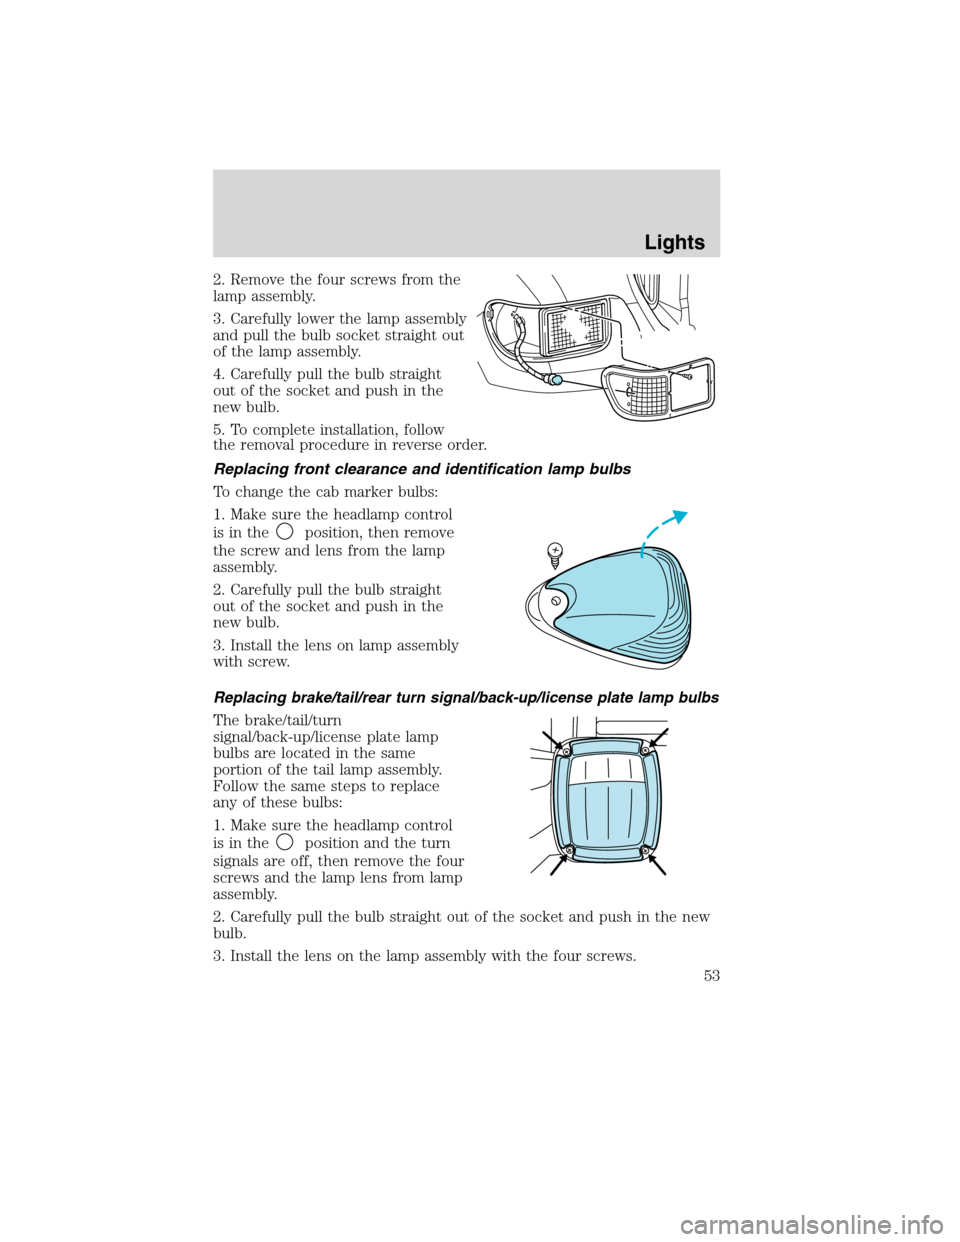 FORD F750 2010 12.G Owners Manual 2. Remove the four screws from the
lamp assembly.
3. Carefully lower the lamp assembly
and pull the bulb socket straight out
of the lamp assembly.
4. Carefully pull the bulb straight
out of the socket